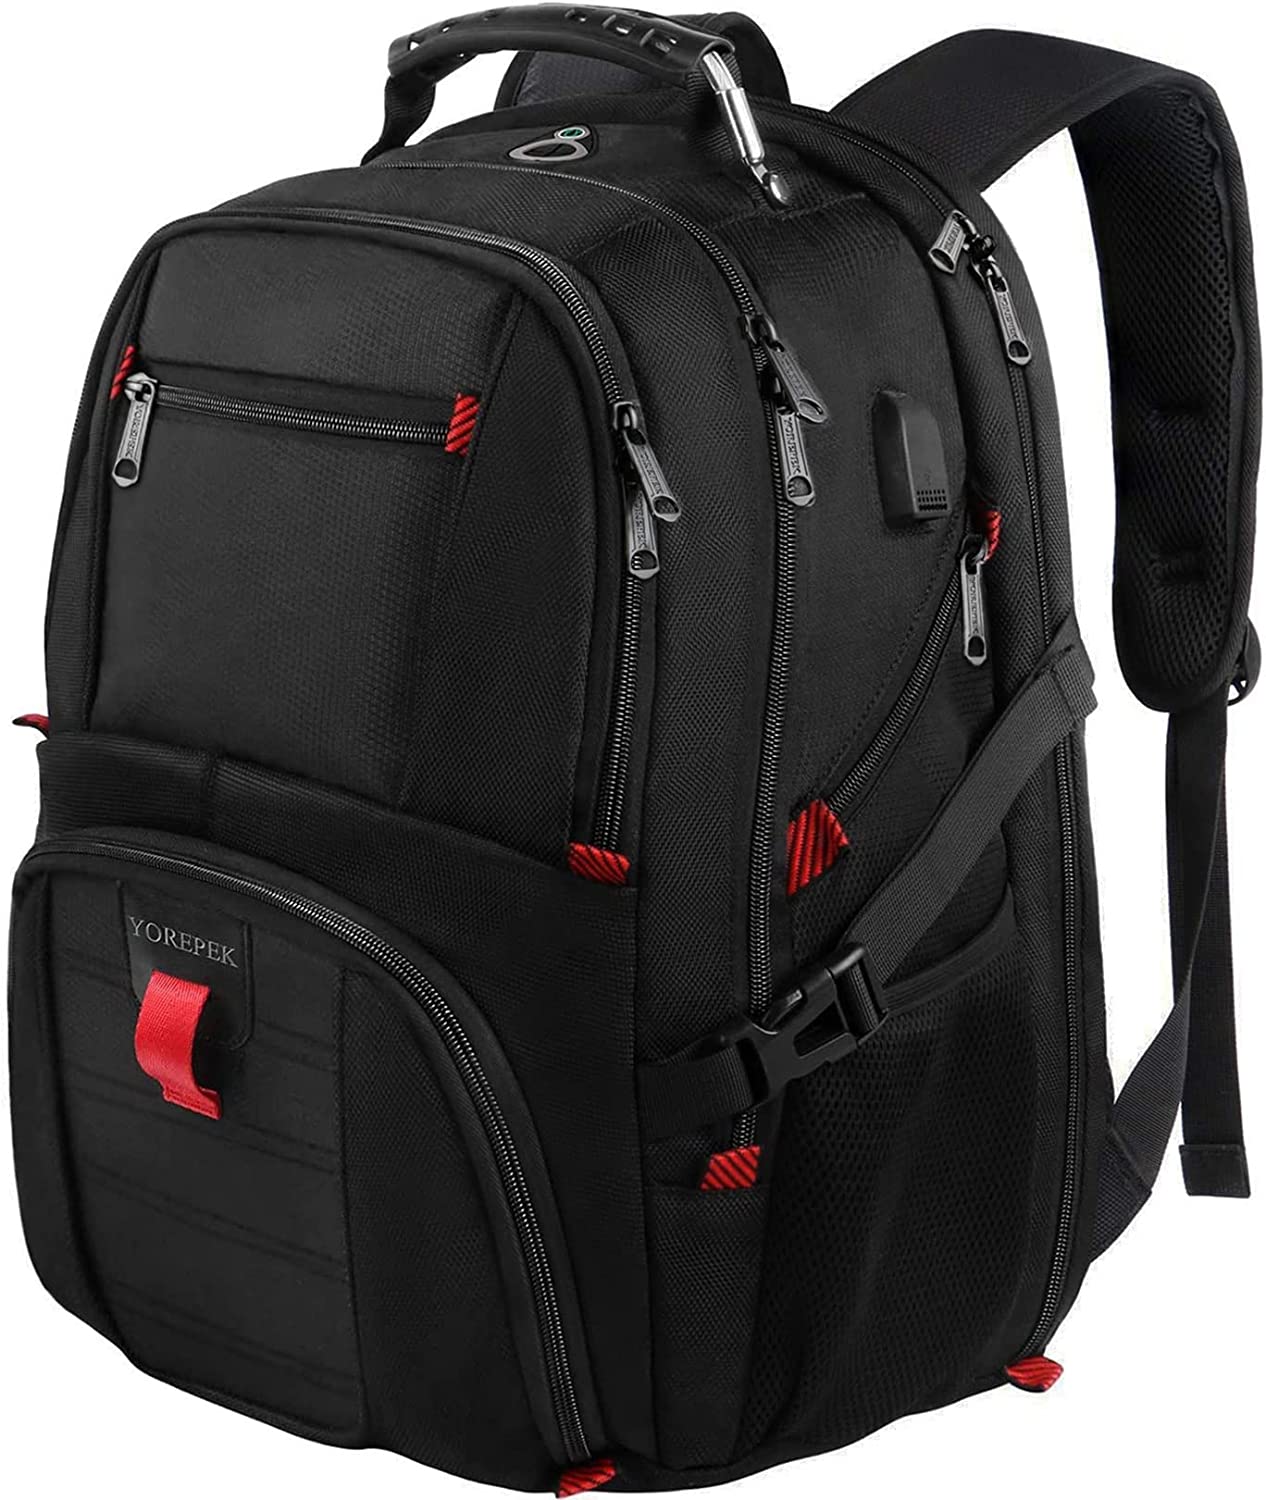 backpack for everyday use review